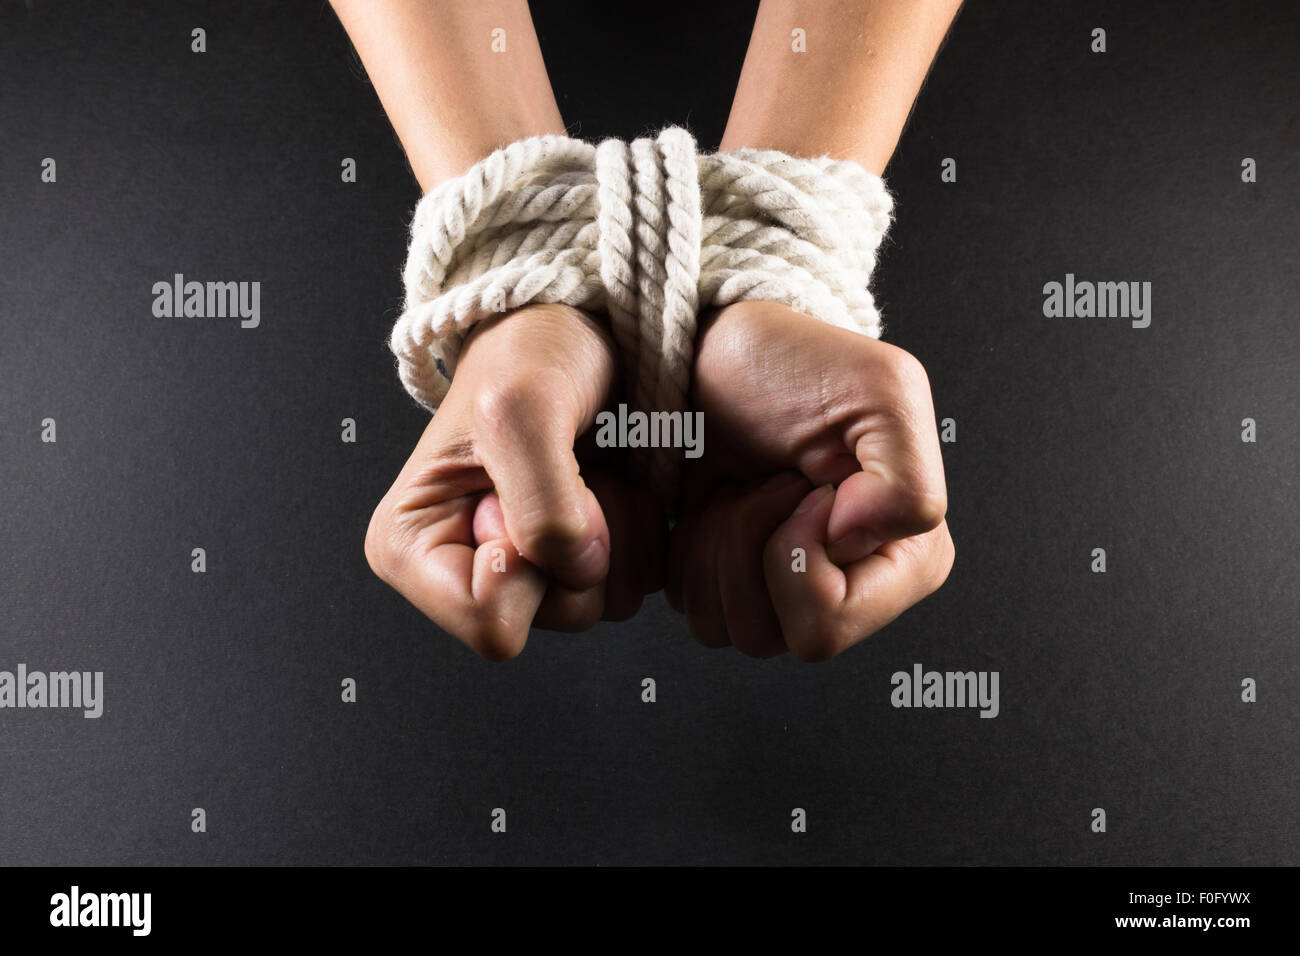 White female hands in bondage tied up with white rope Stock Photo